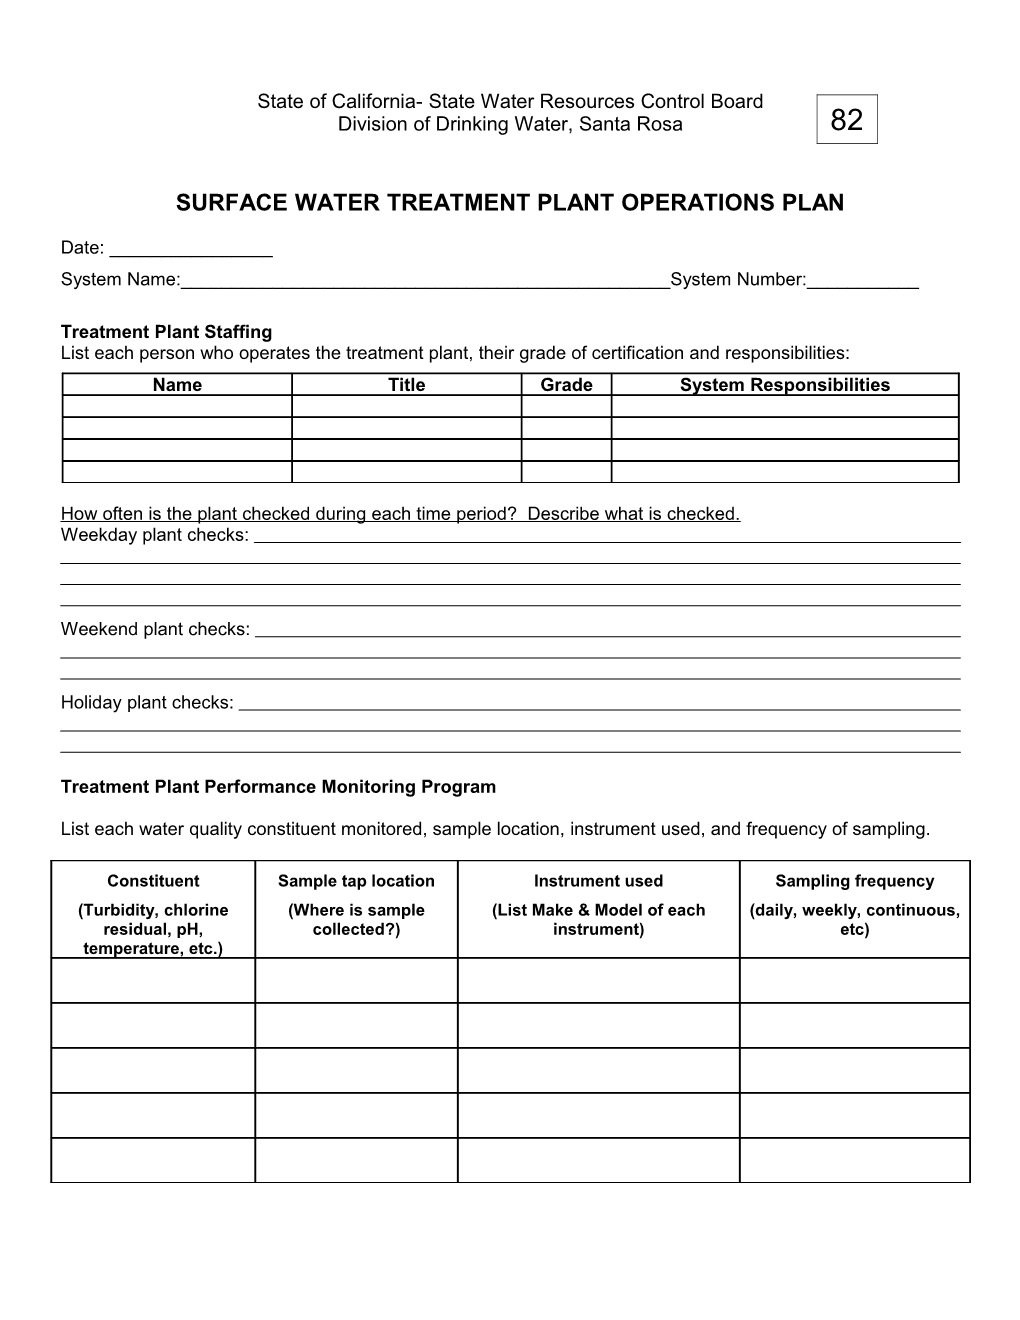 SWS Operations Plan Form